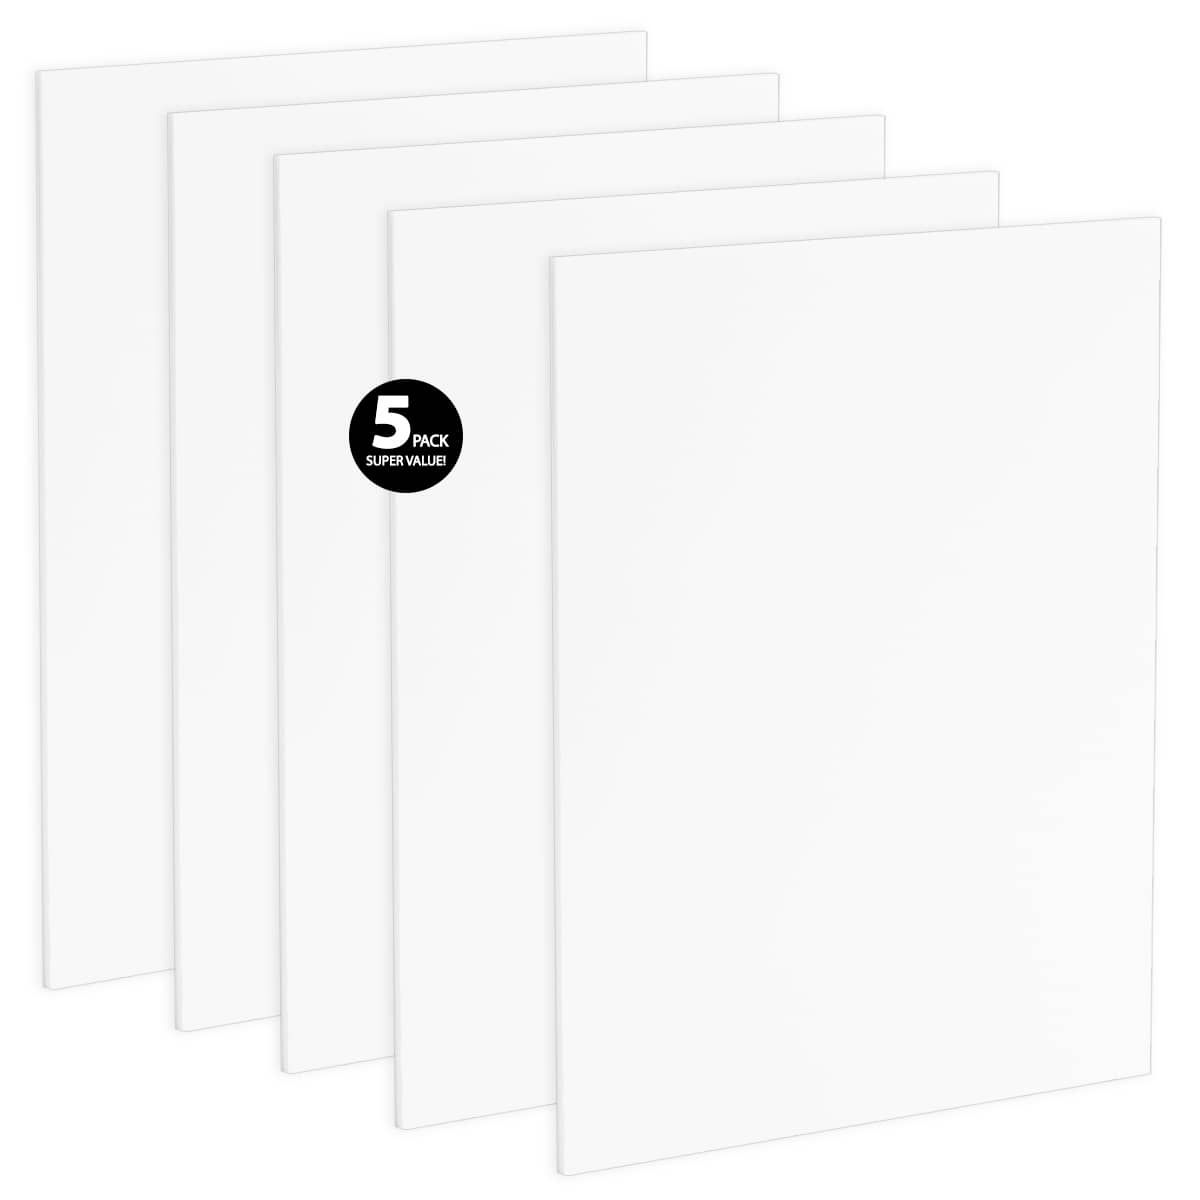 Viewpoint Acid-Free White Foam Backing 8.5x11", 1/8" Thick 5 Pack